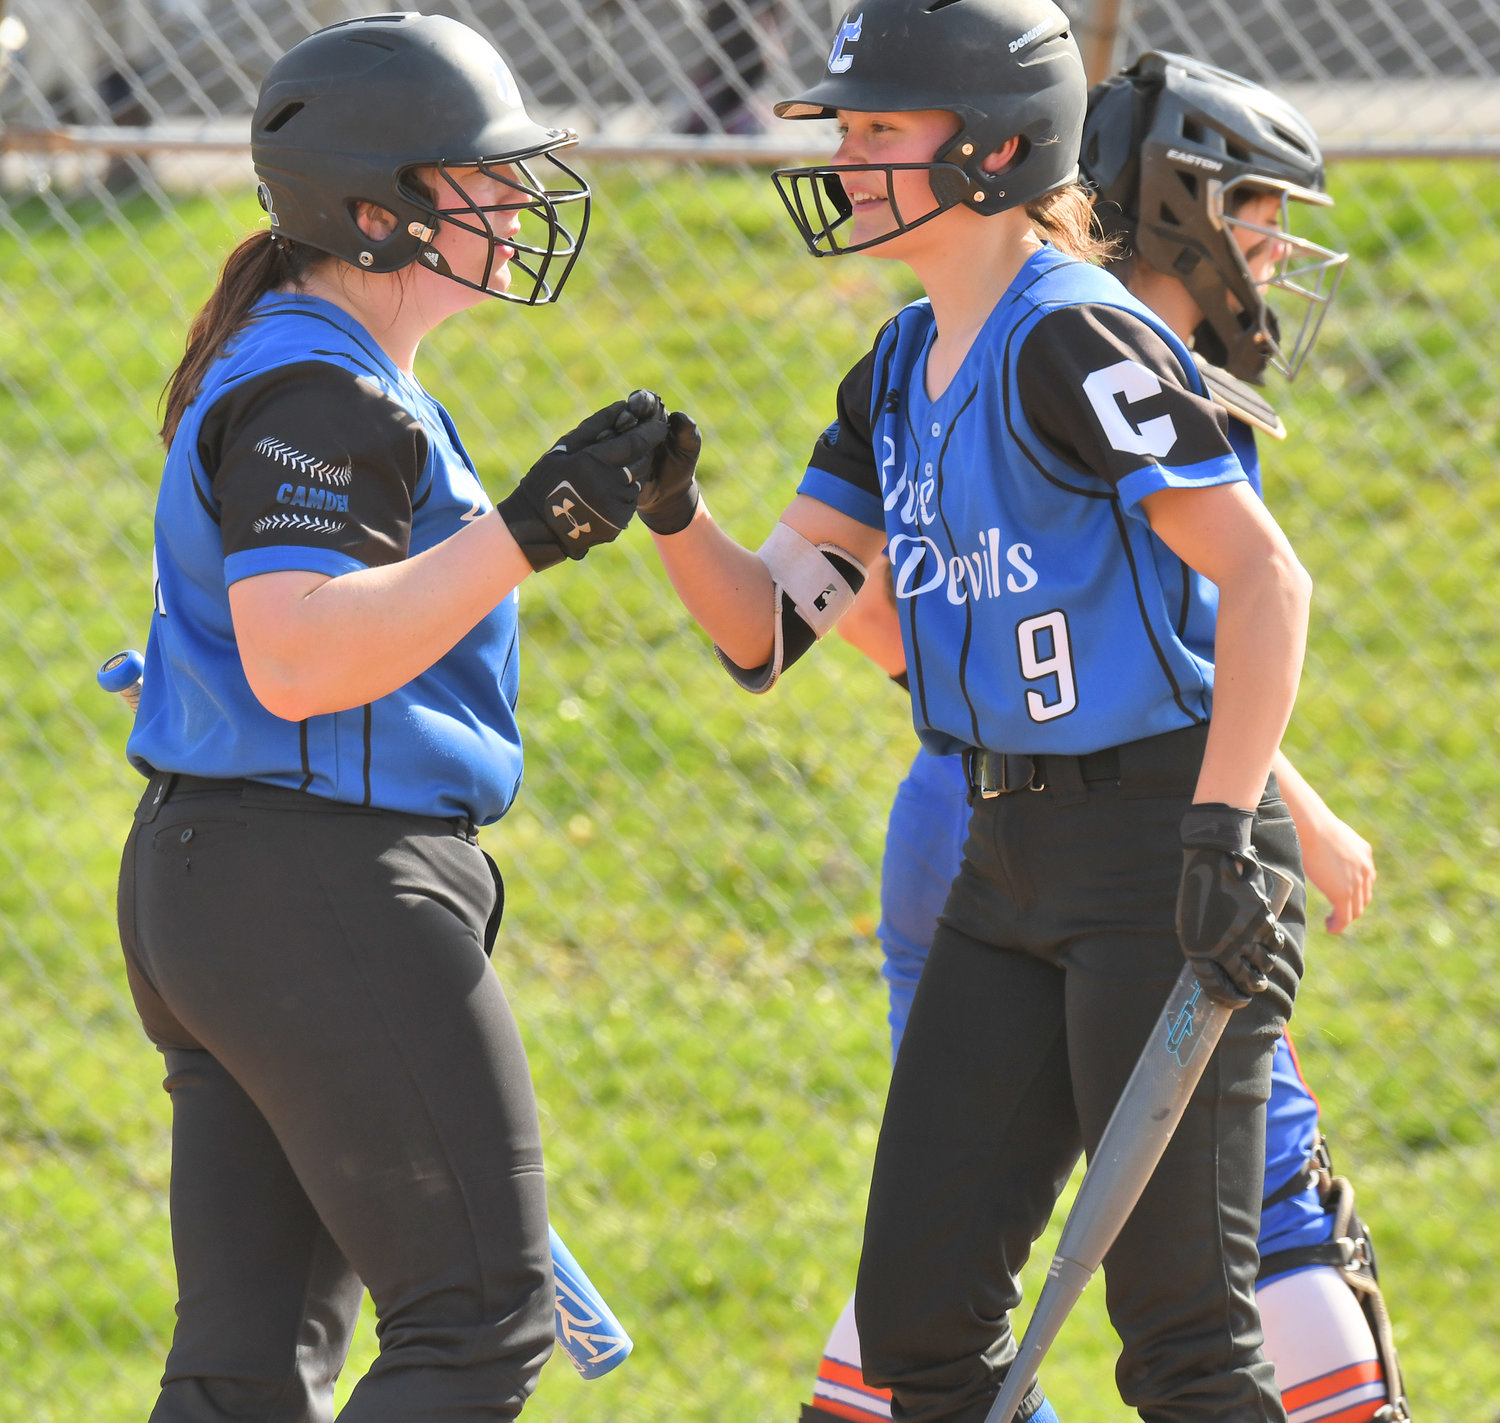 DEVILS STRIKE FIRST — Camden’s Kaitlyn Findlay, left, congratulates Brooke Musch after Musch scored the Blue Devils’ first run of the game Monday at Oneida. The Blue Devils won 9-6.